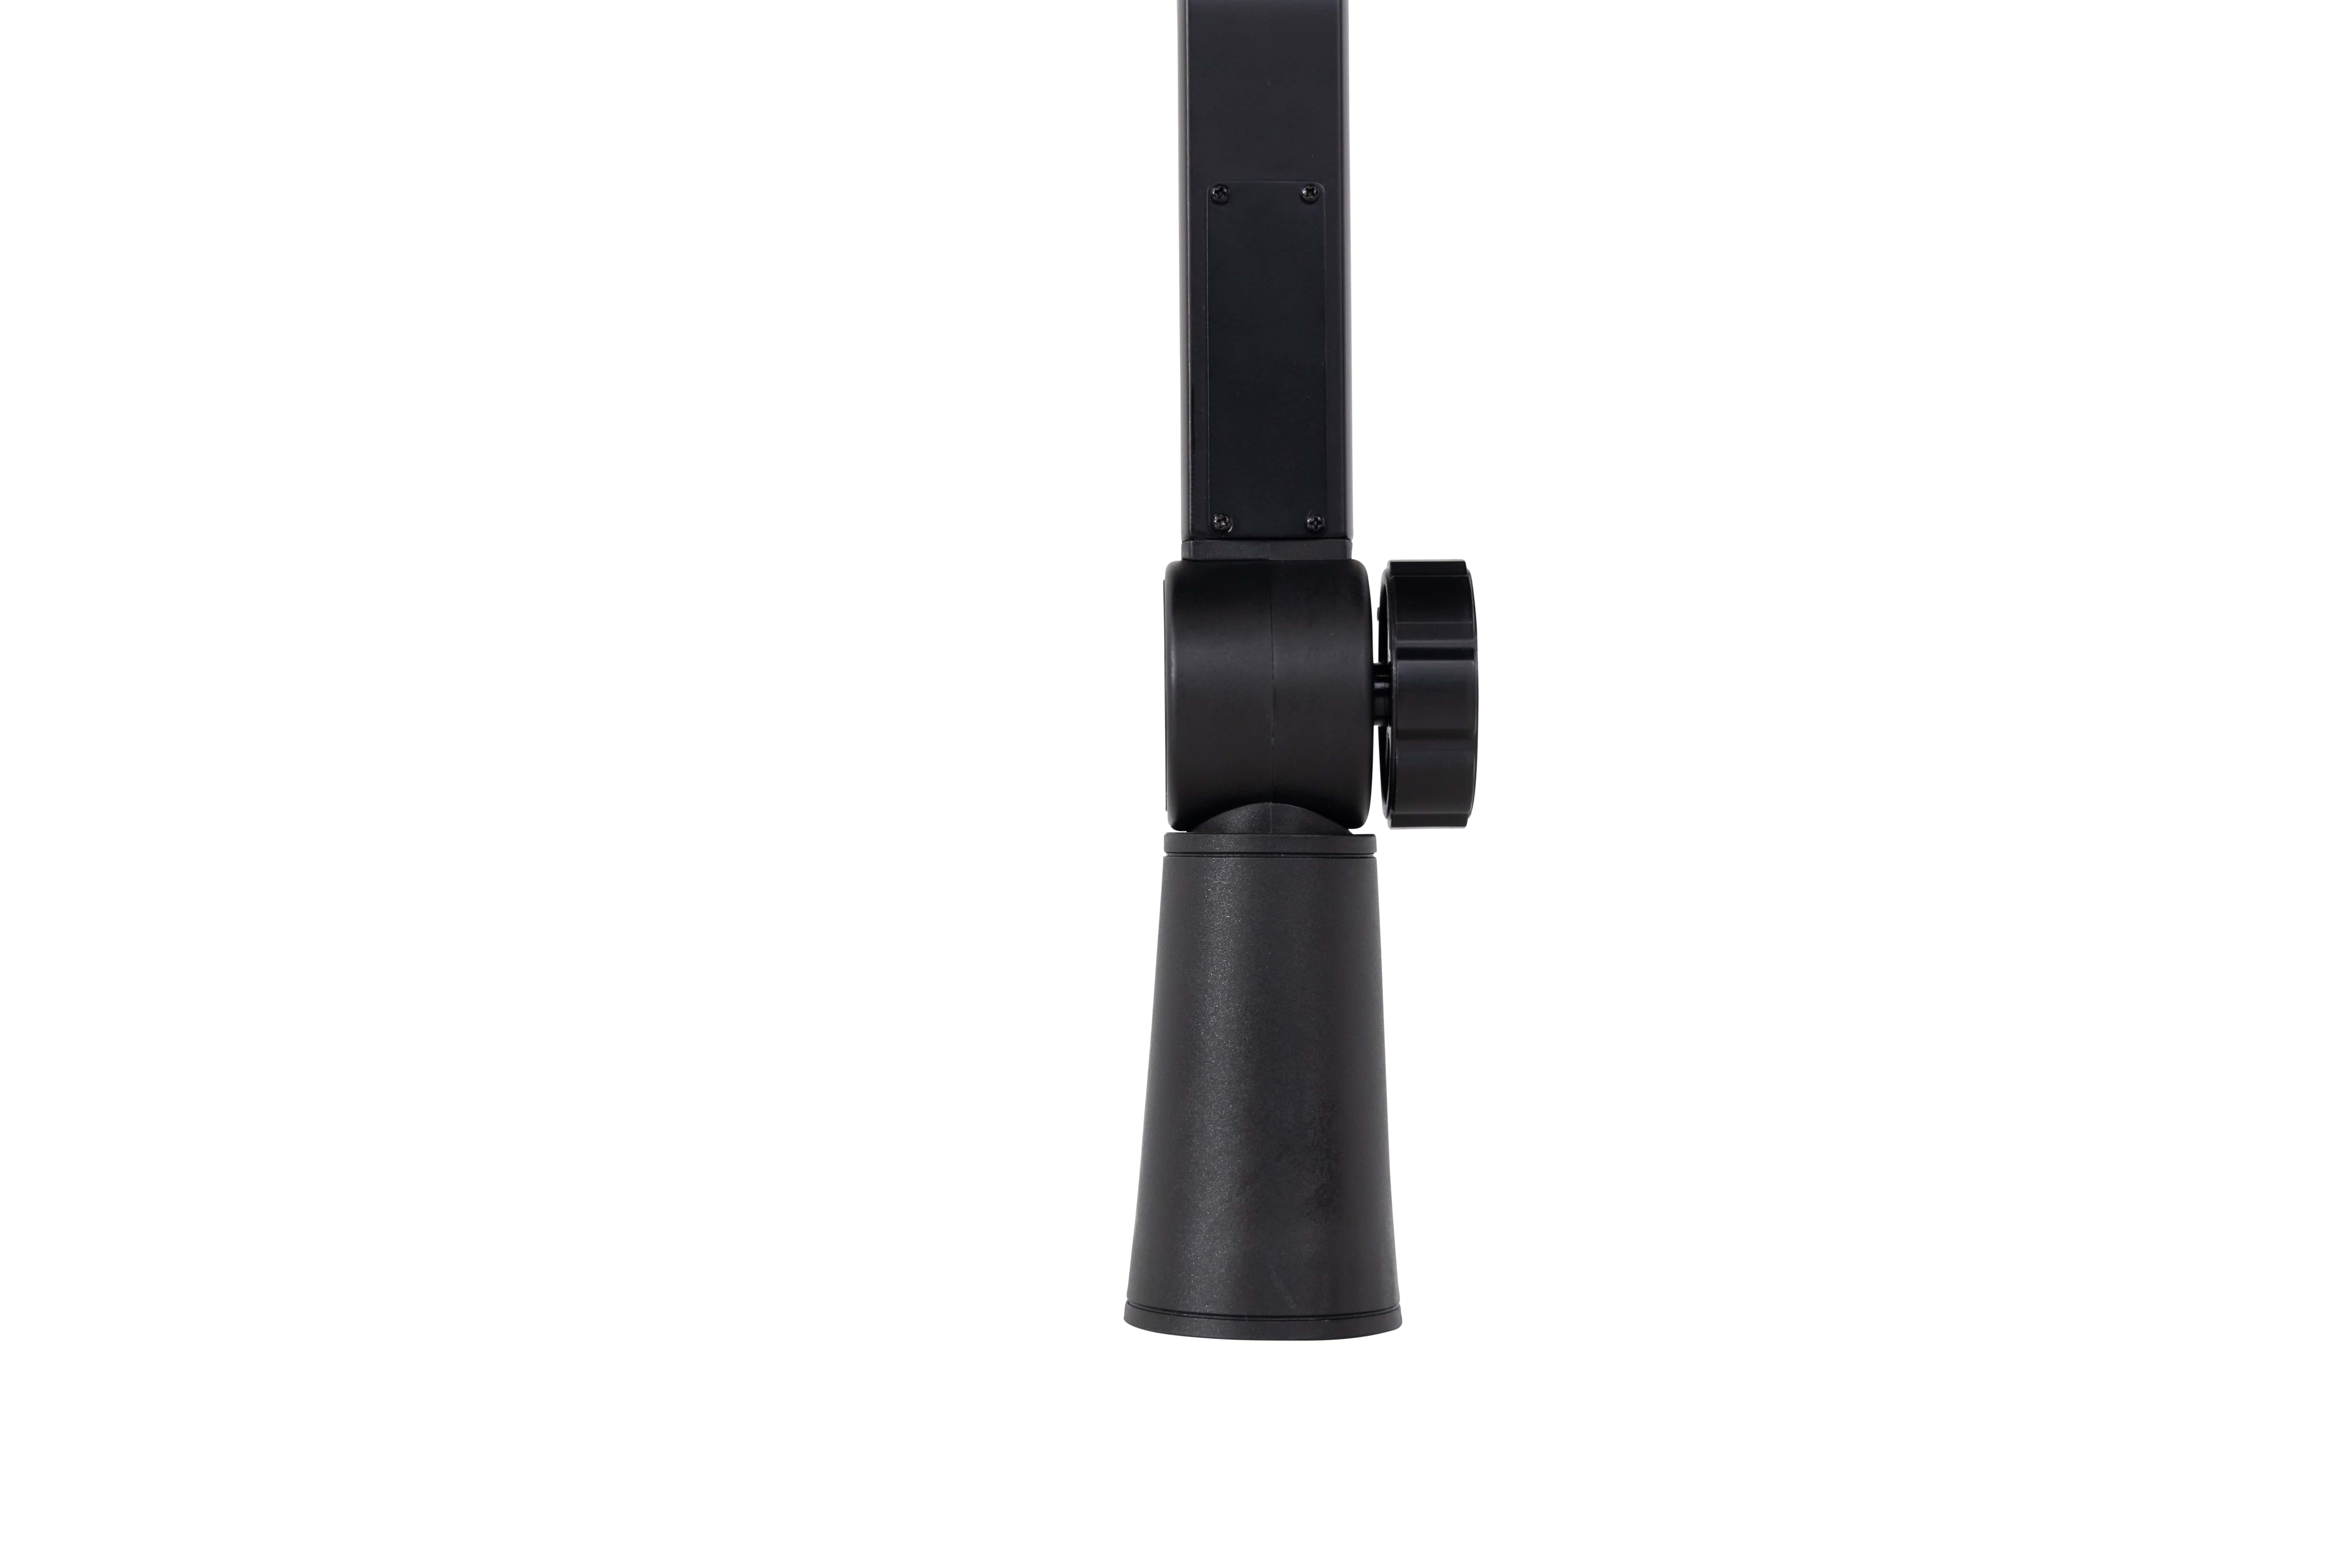 Gator Frameworks Bras Articule A Pince Deluxe Pour Micro - Microphone stand - Variation 10